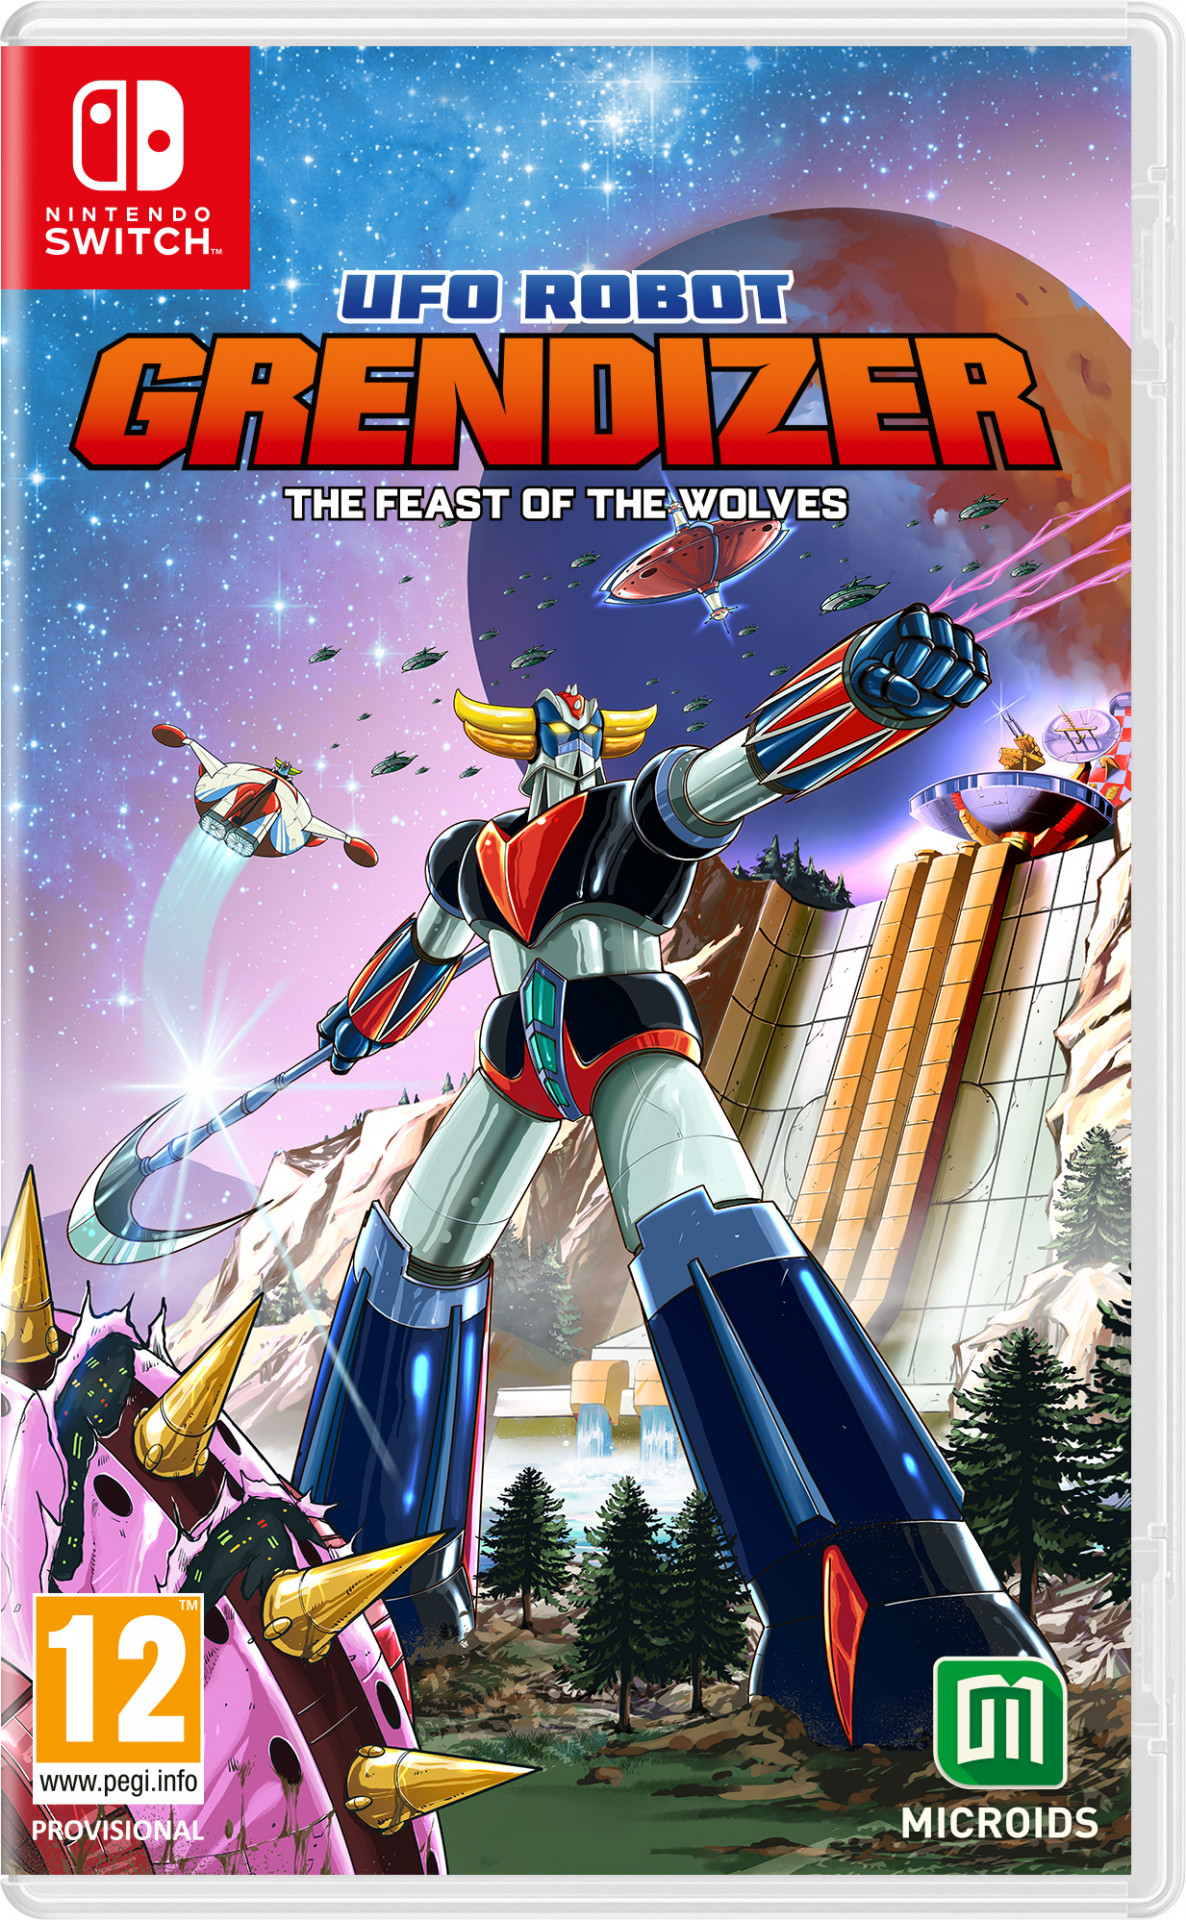 UFO Robot Grendizer: The Feast of the Wolves (Switch), Microids